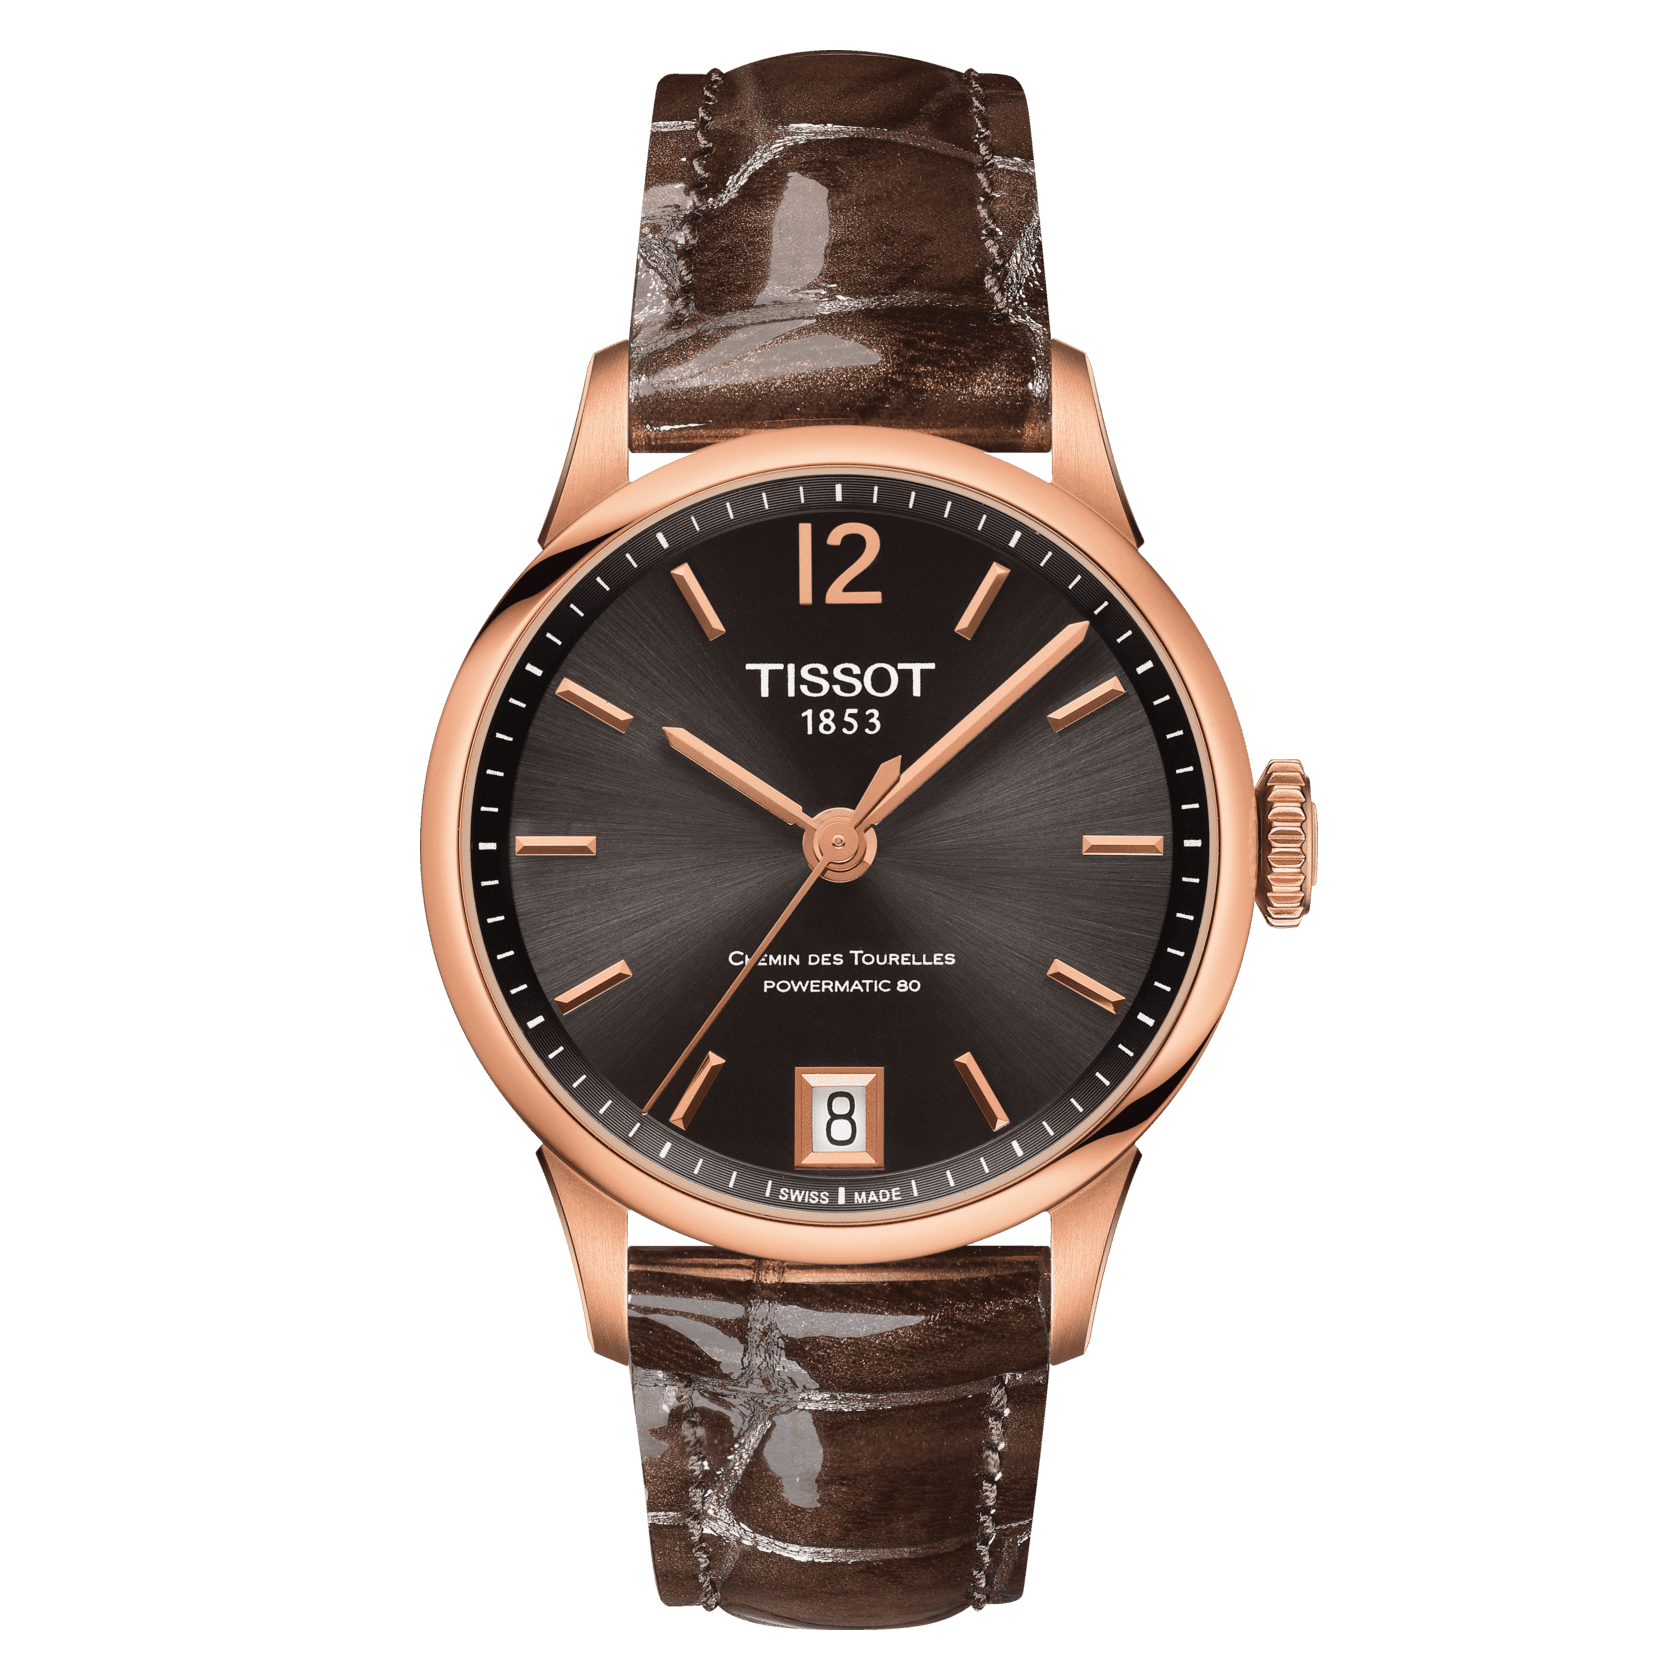 Where To Buy Replica Watches In Los Angeles